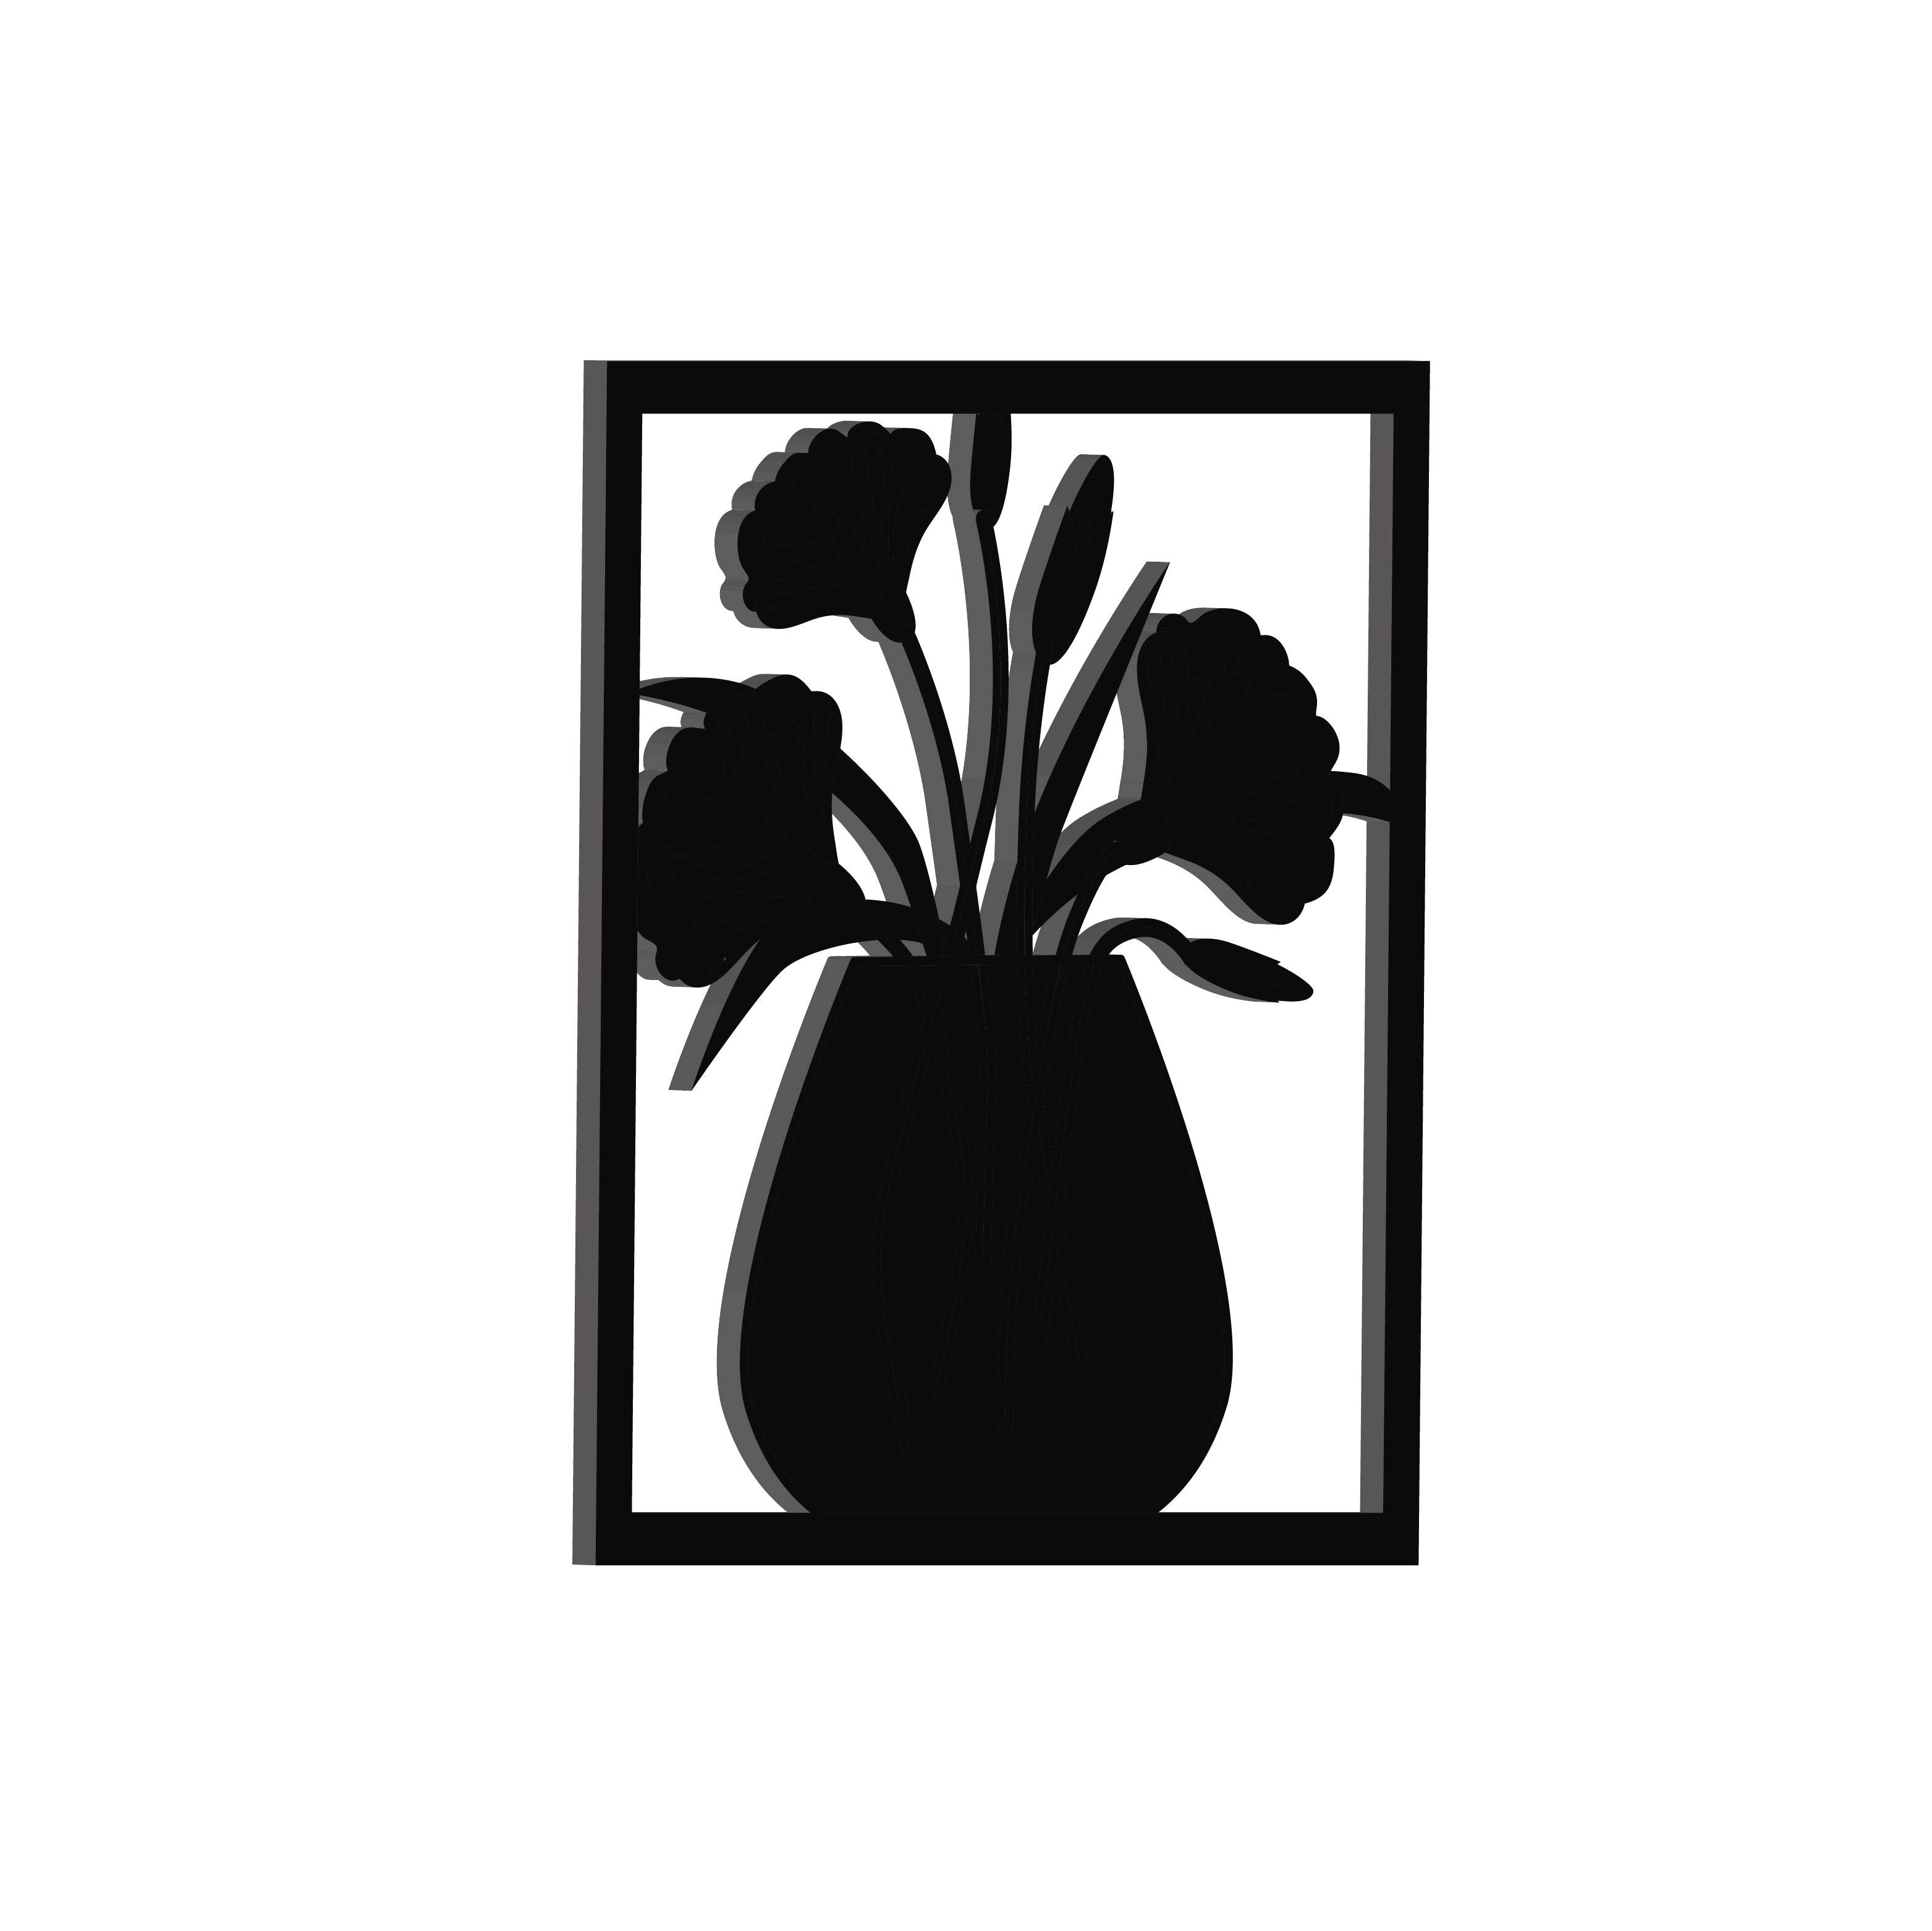 Flower Vase Frame Black Engineered Wood Wall Art Cutout, Ready To Hang Home Decor 4